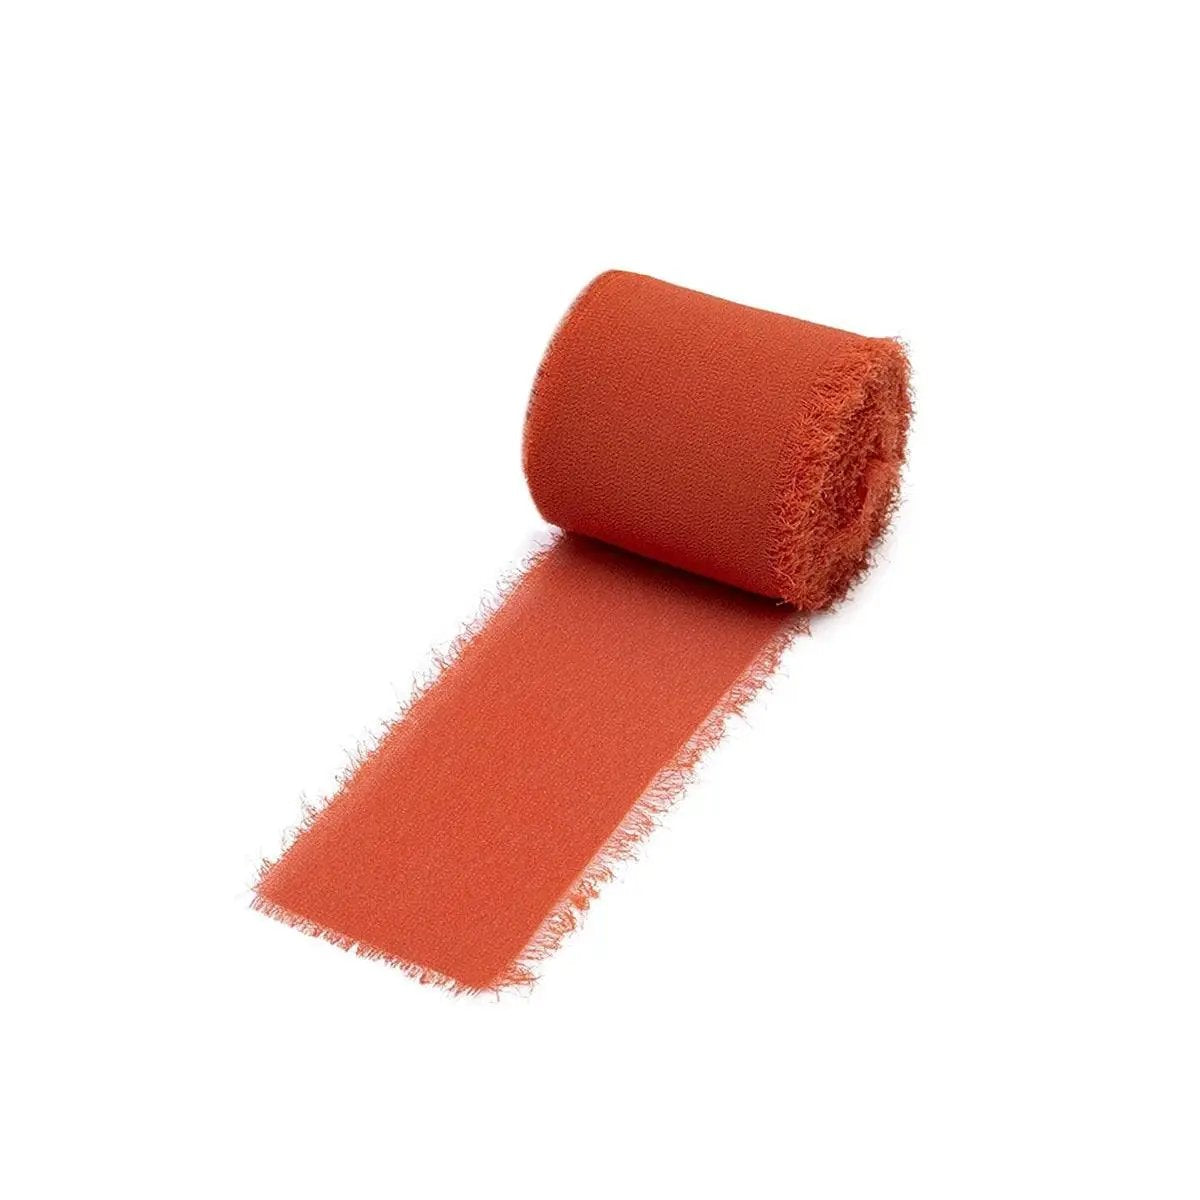 a roll of orange fabric on a white background